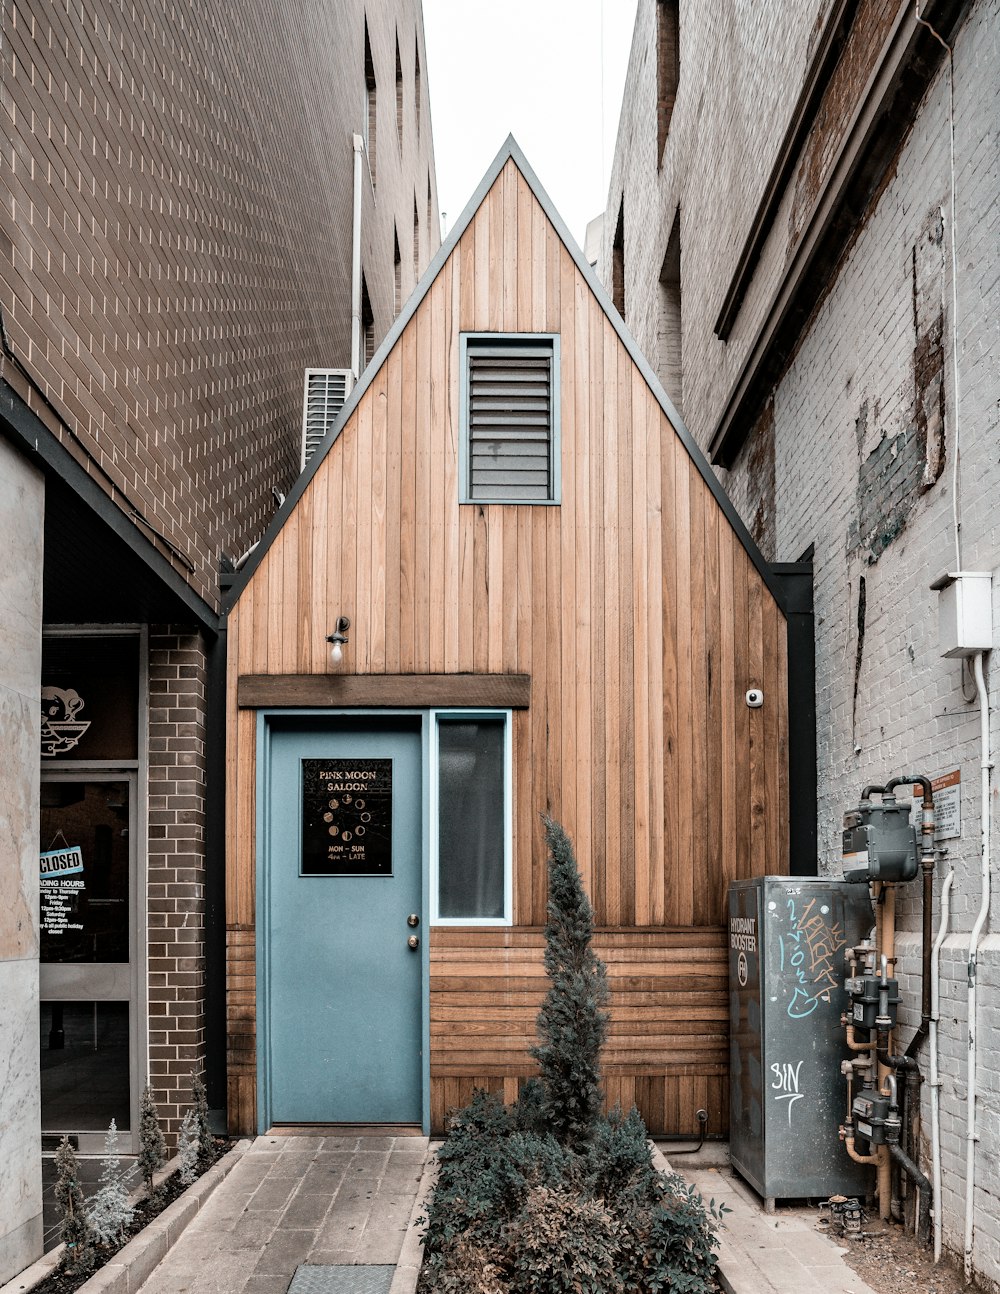 brown wooden house at the alley between buildings